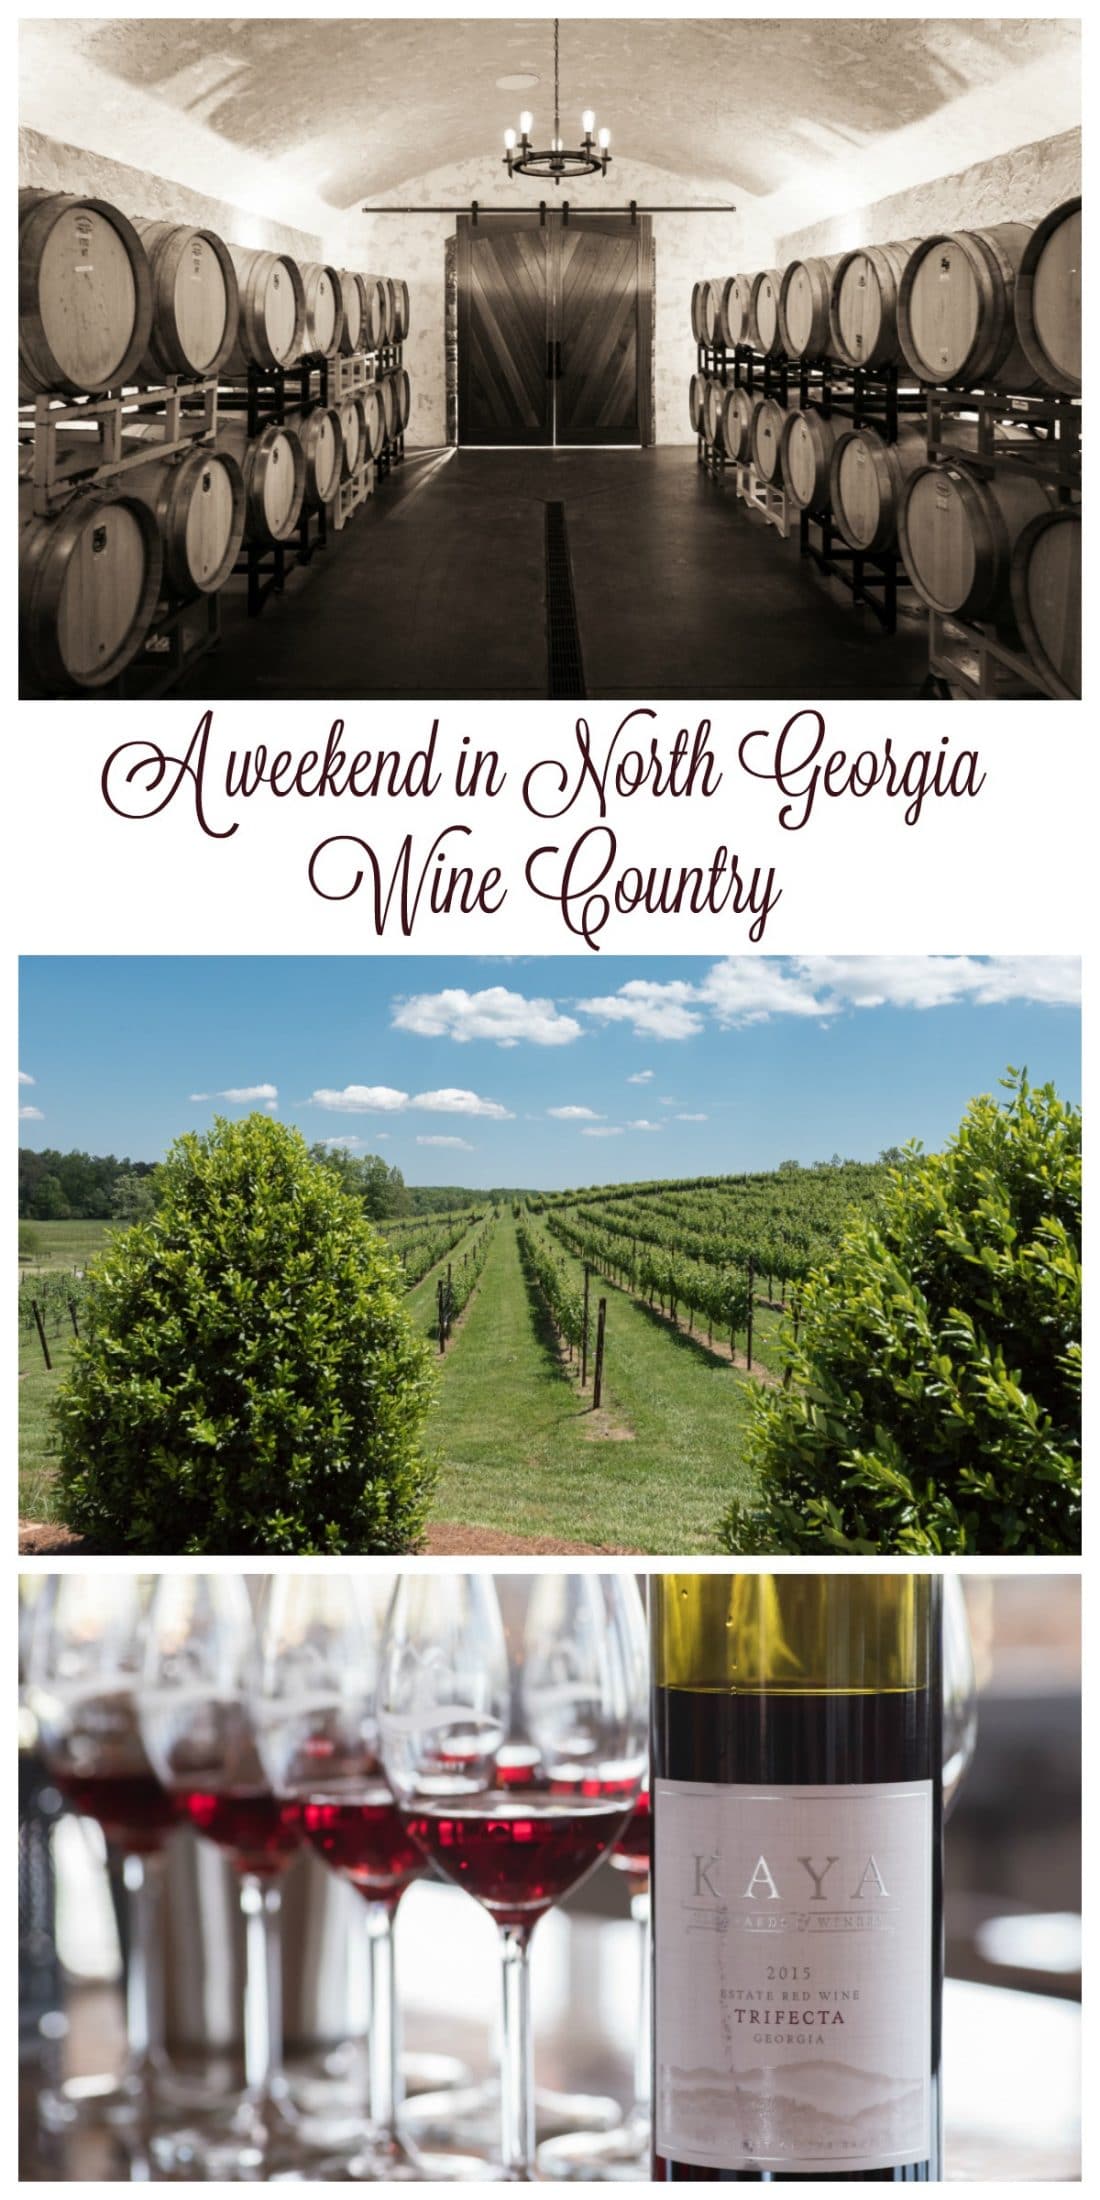 A weekend in North Georgia Wine Country